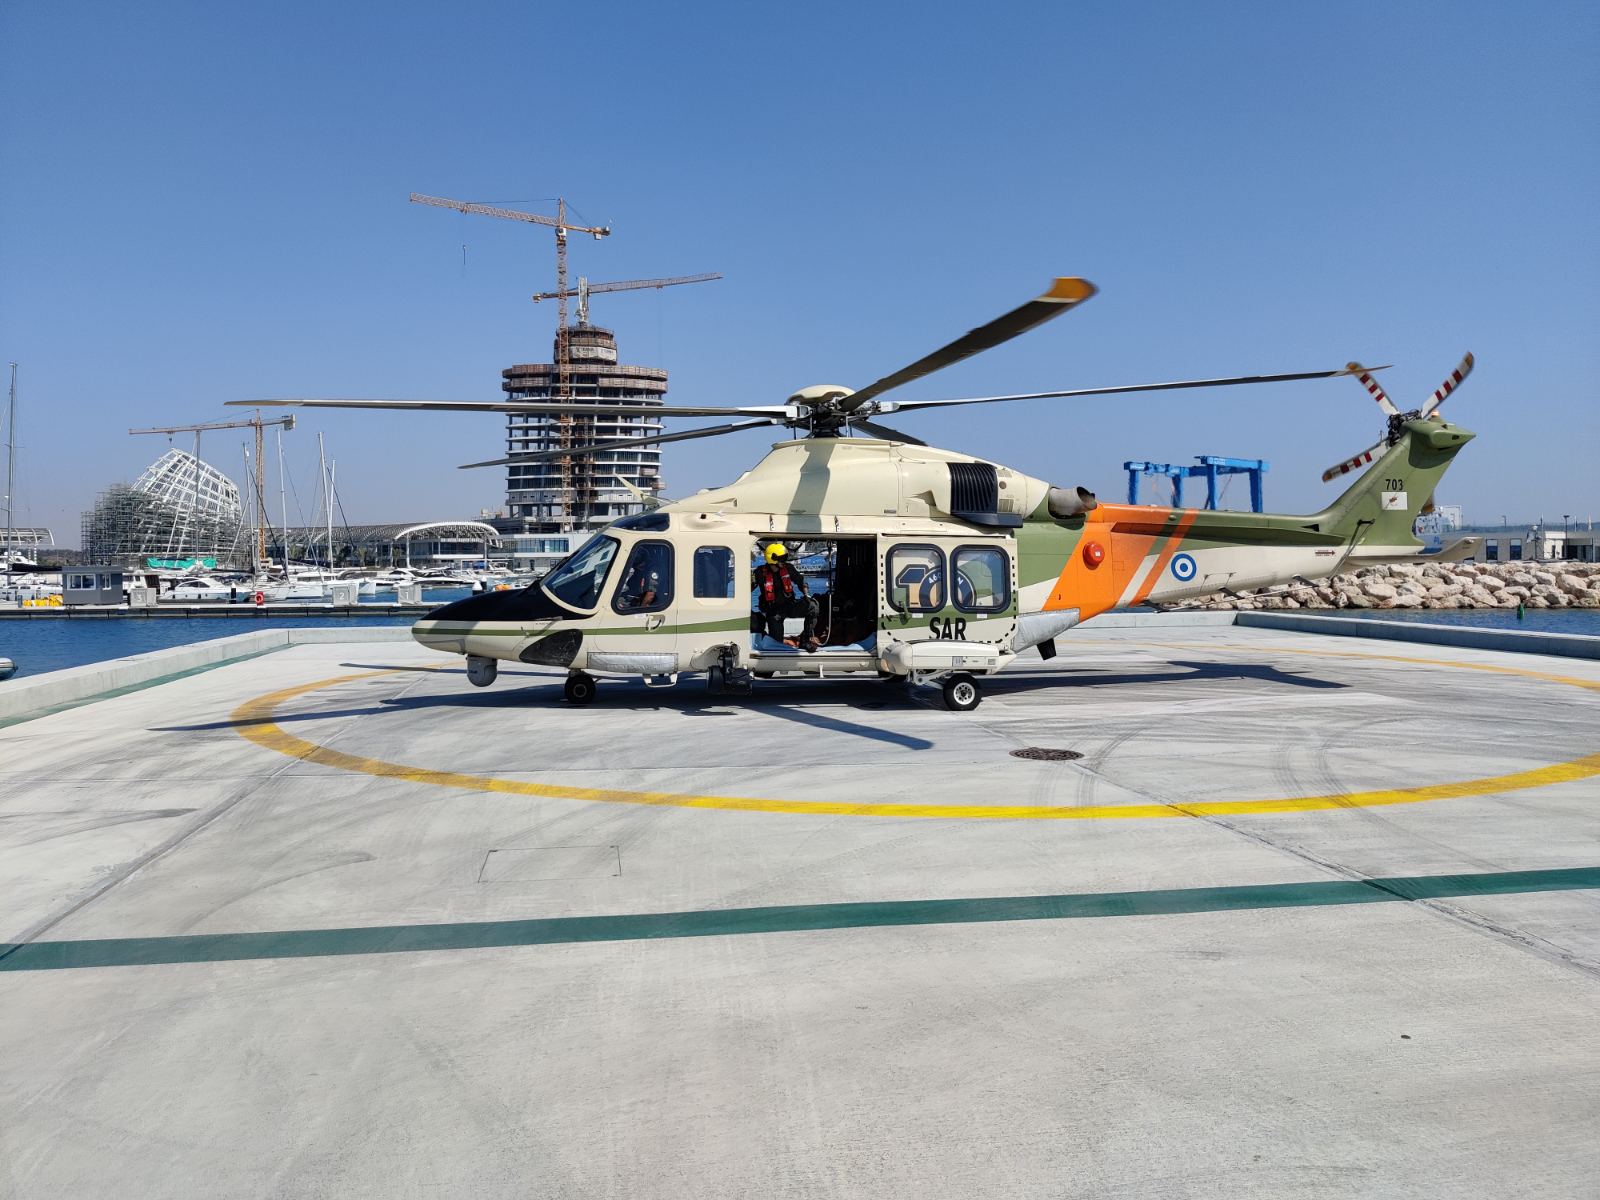 Execution of familiarization flights at the Ayia Napa Marina Heliport by Helicopters of the RoC SAR System